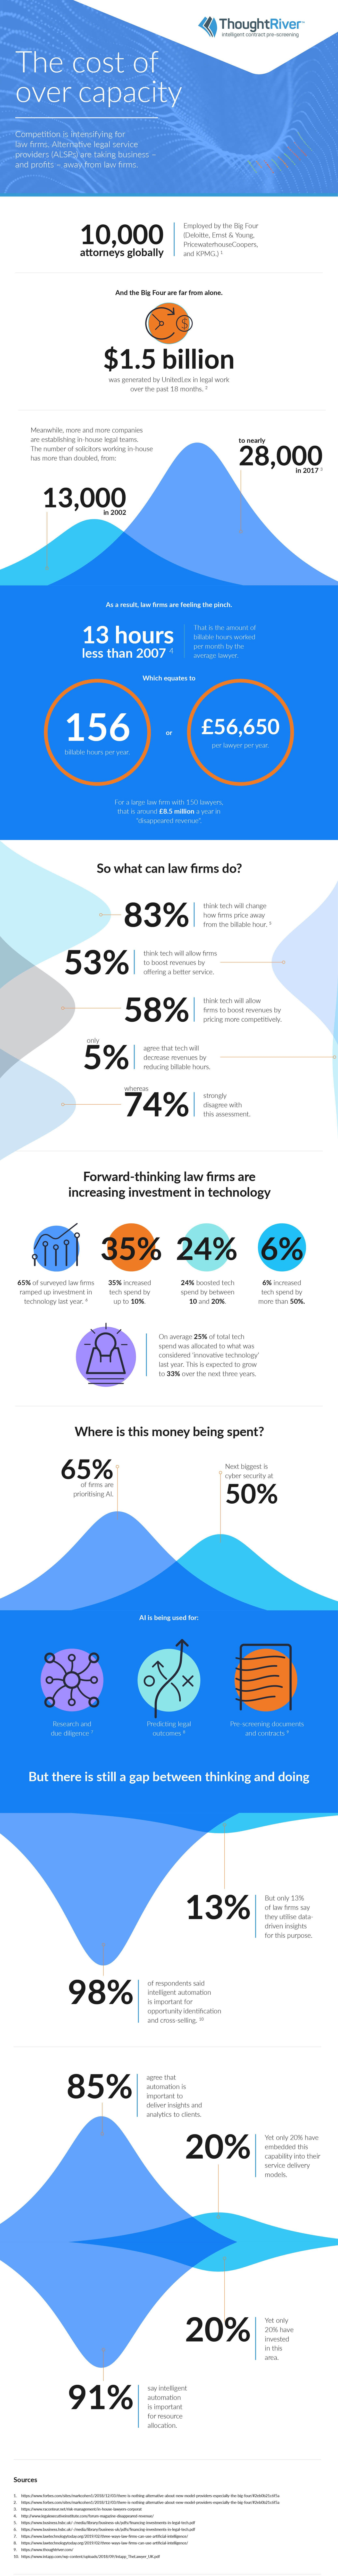 TR---IG---Infographic---Why-law-firms-are-looking-to-tech-to-open-up-new-revenue-streams (1)